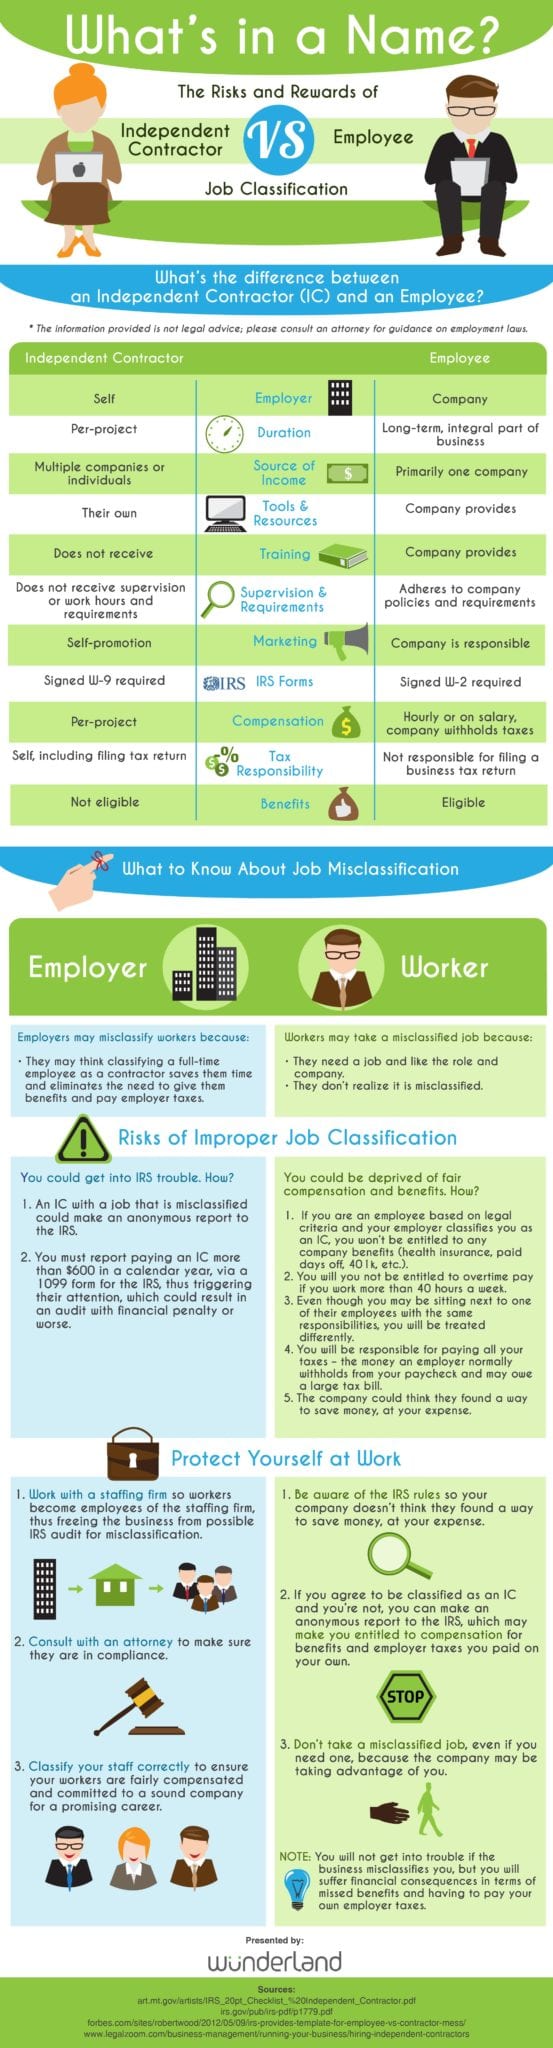 Contractor-vs-Employee-Risks-and-Rewards-Infographic